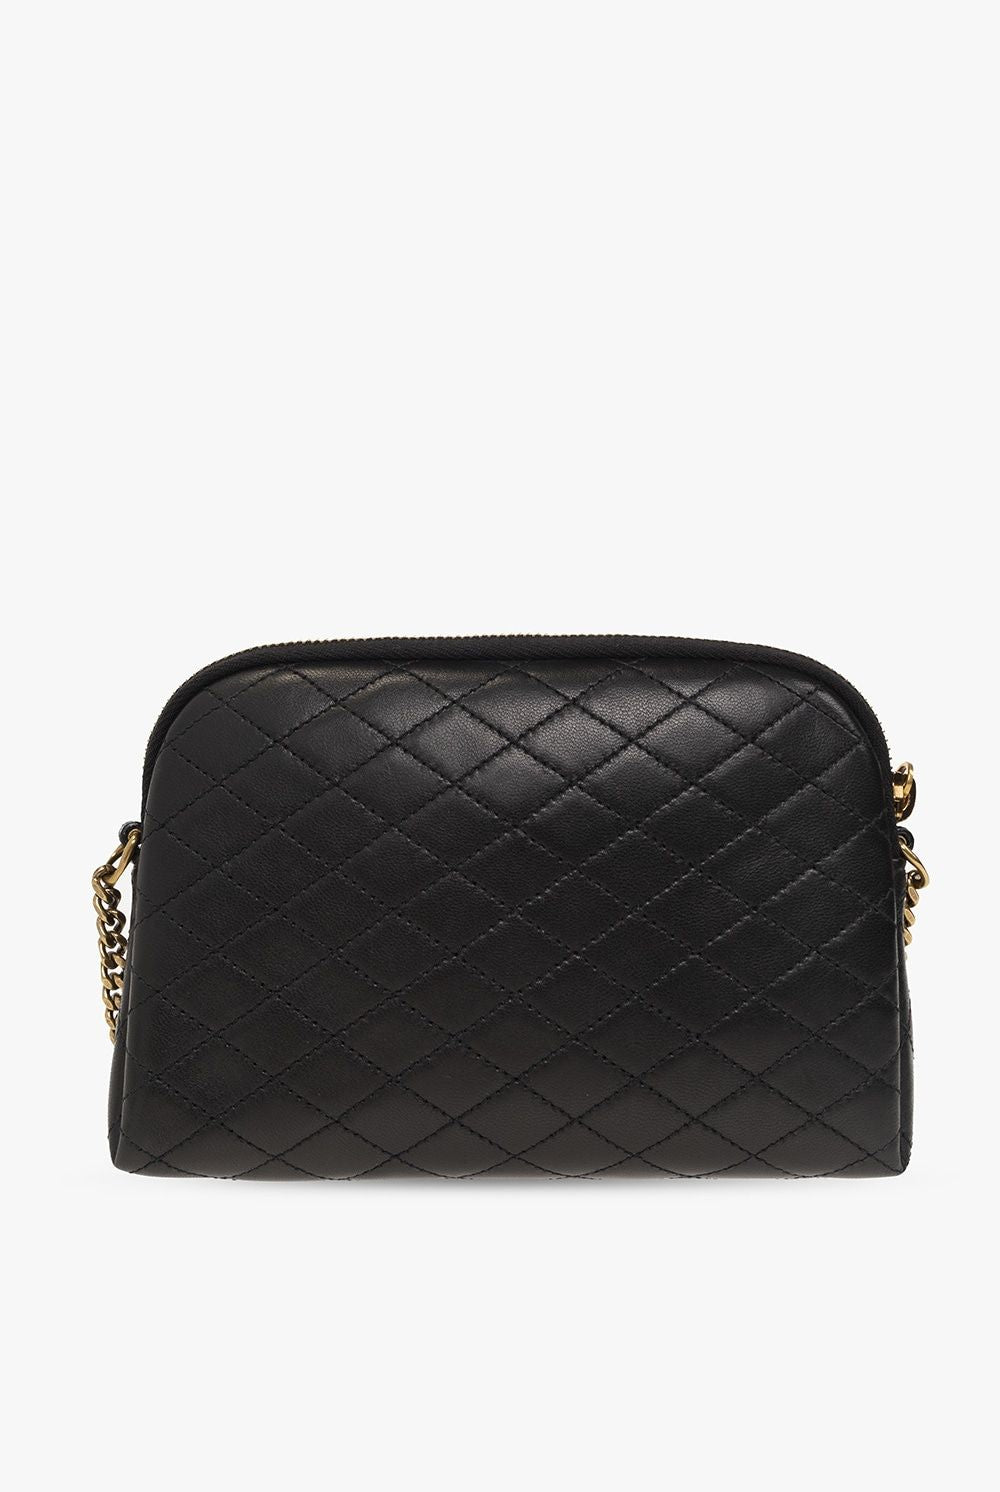 SAINT LAURENT Black Quilted GABY Pouch Handbag with YSL Monogram